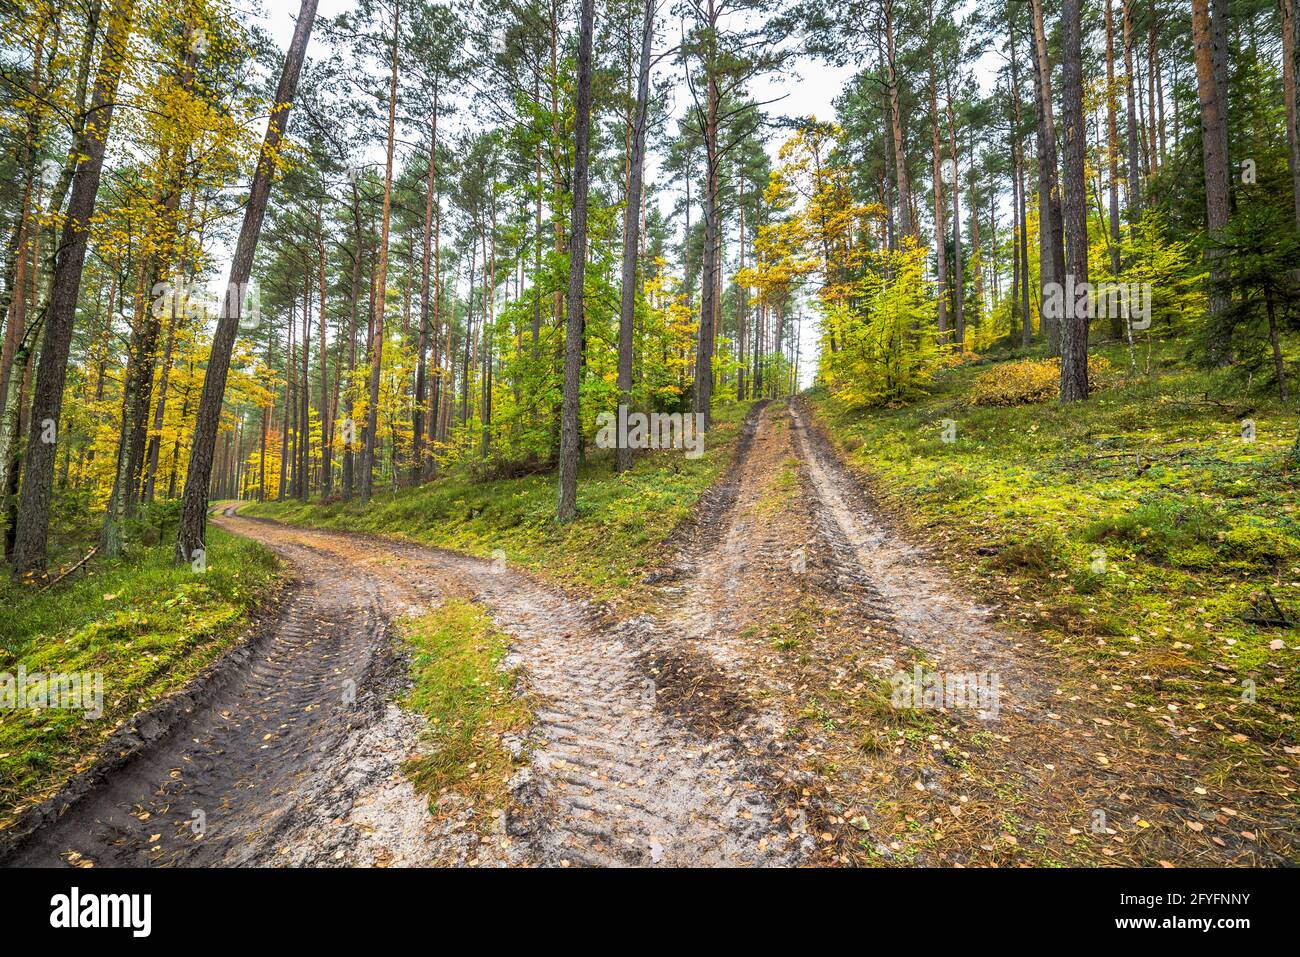 Cross roads in autumn forest, fall landscape Stock Photo